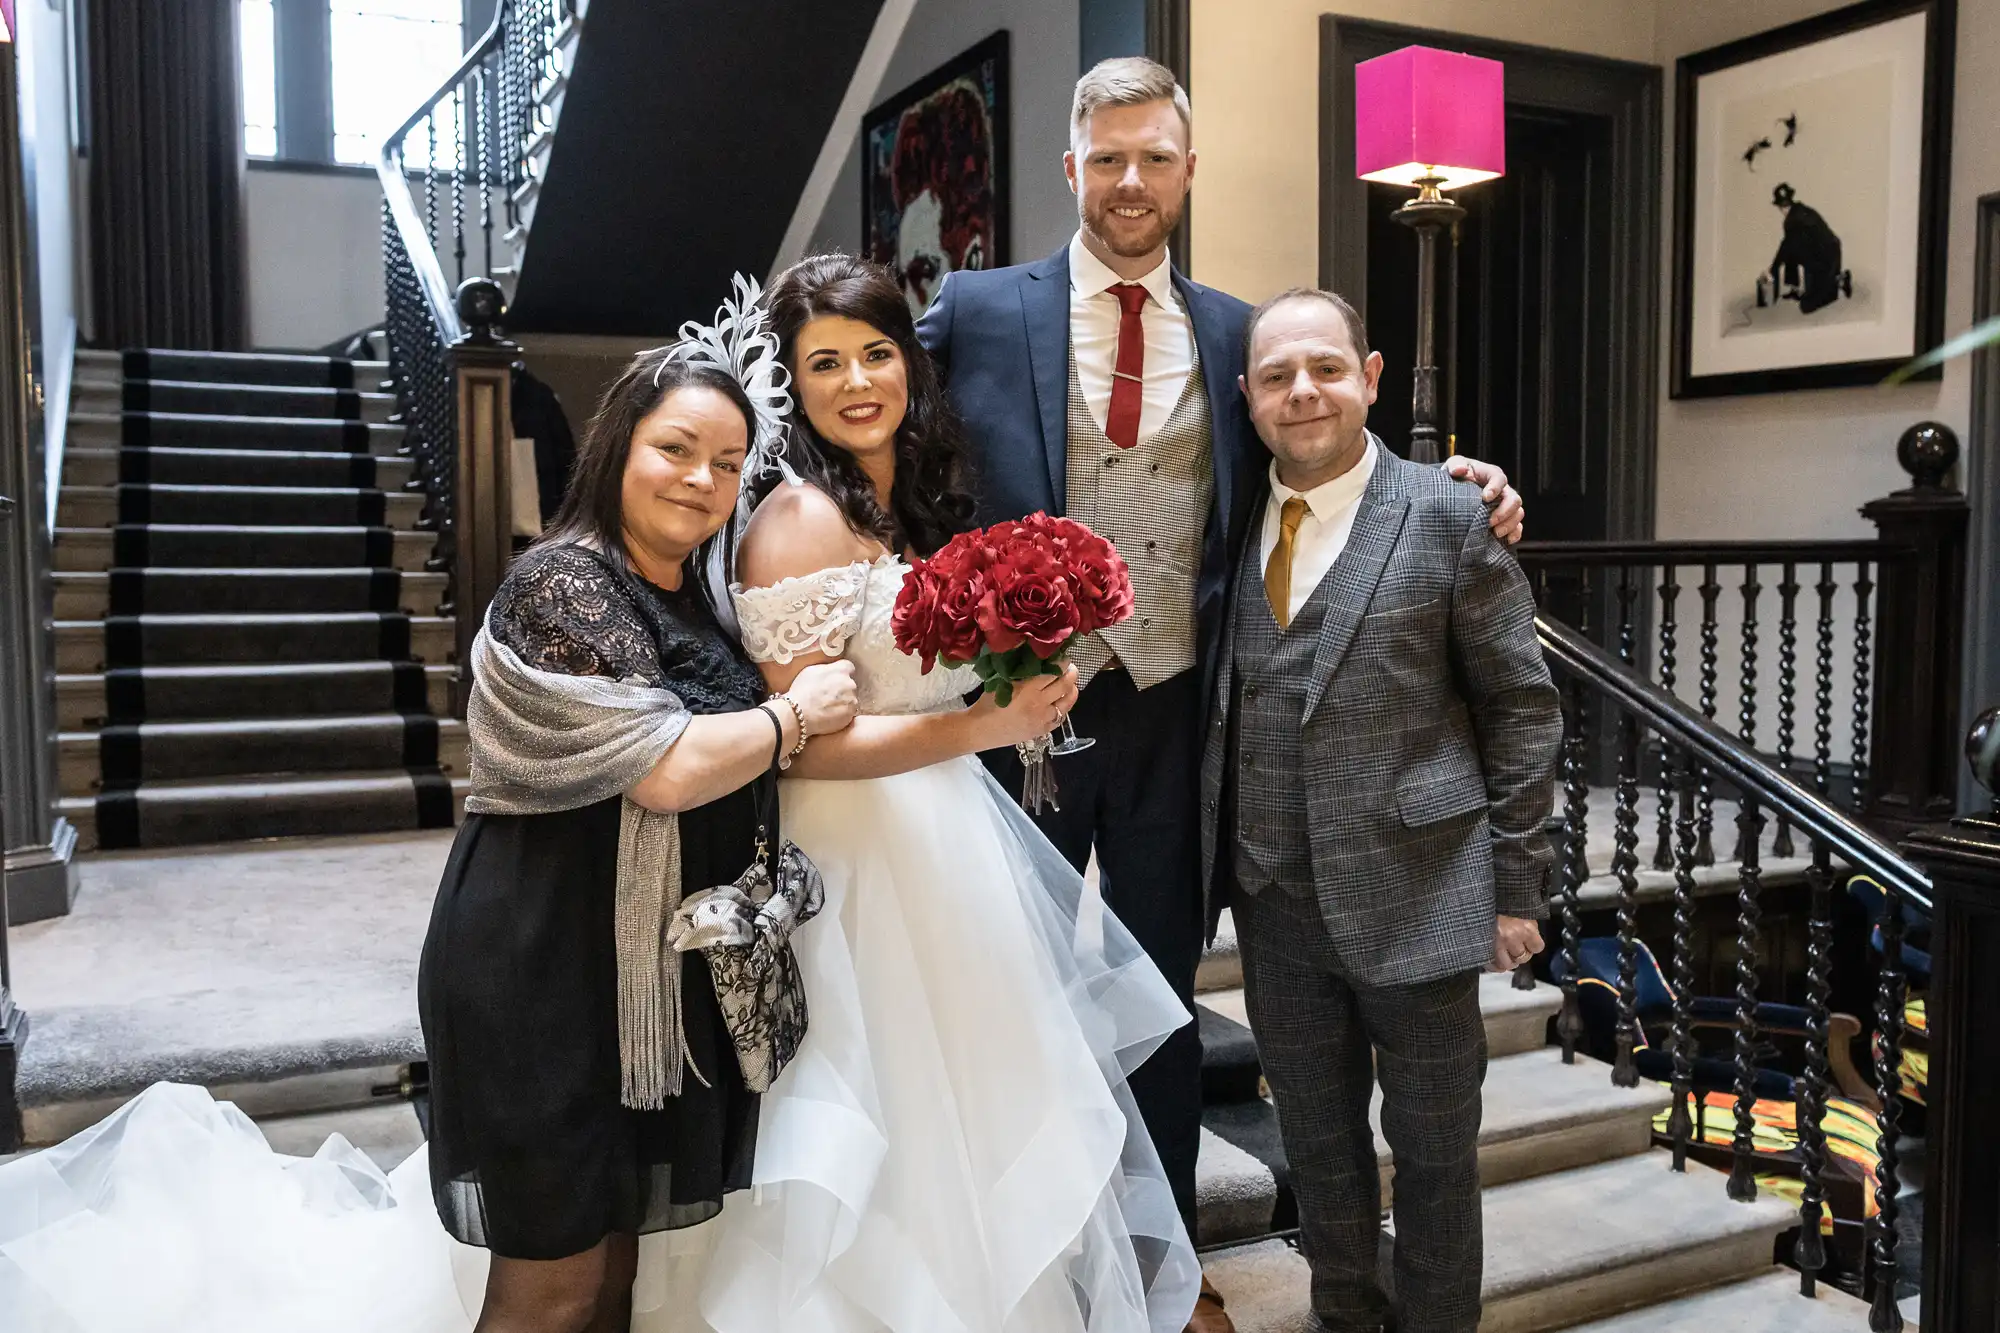 Four people pose for a wedding photo near a staircase. The bride holds a bouquet of red flowers and stands next to the groom, and two other guests flank them.